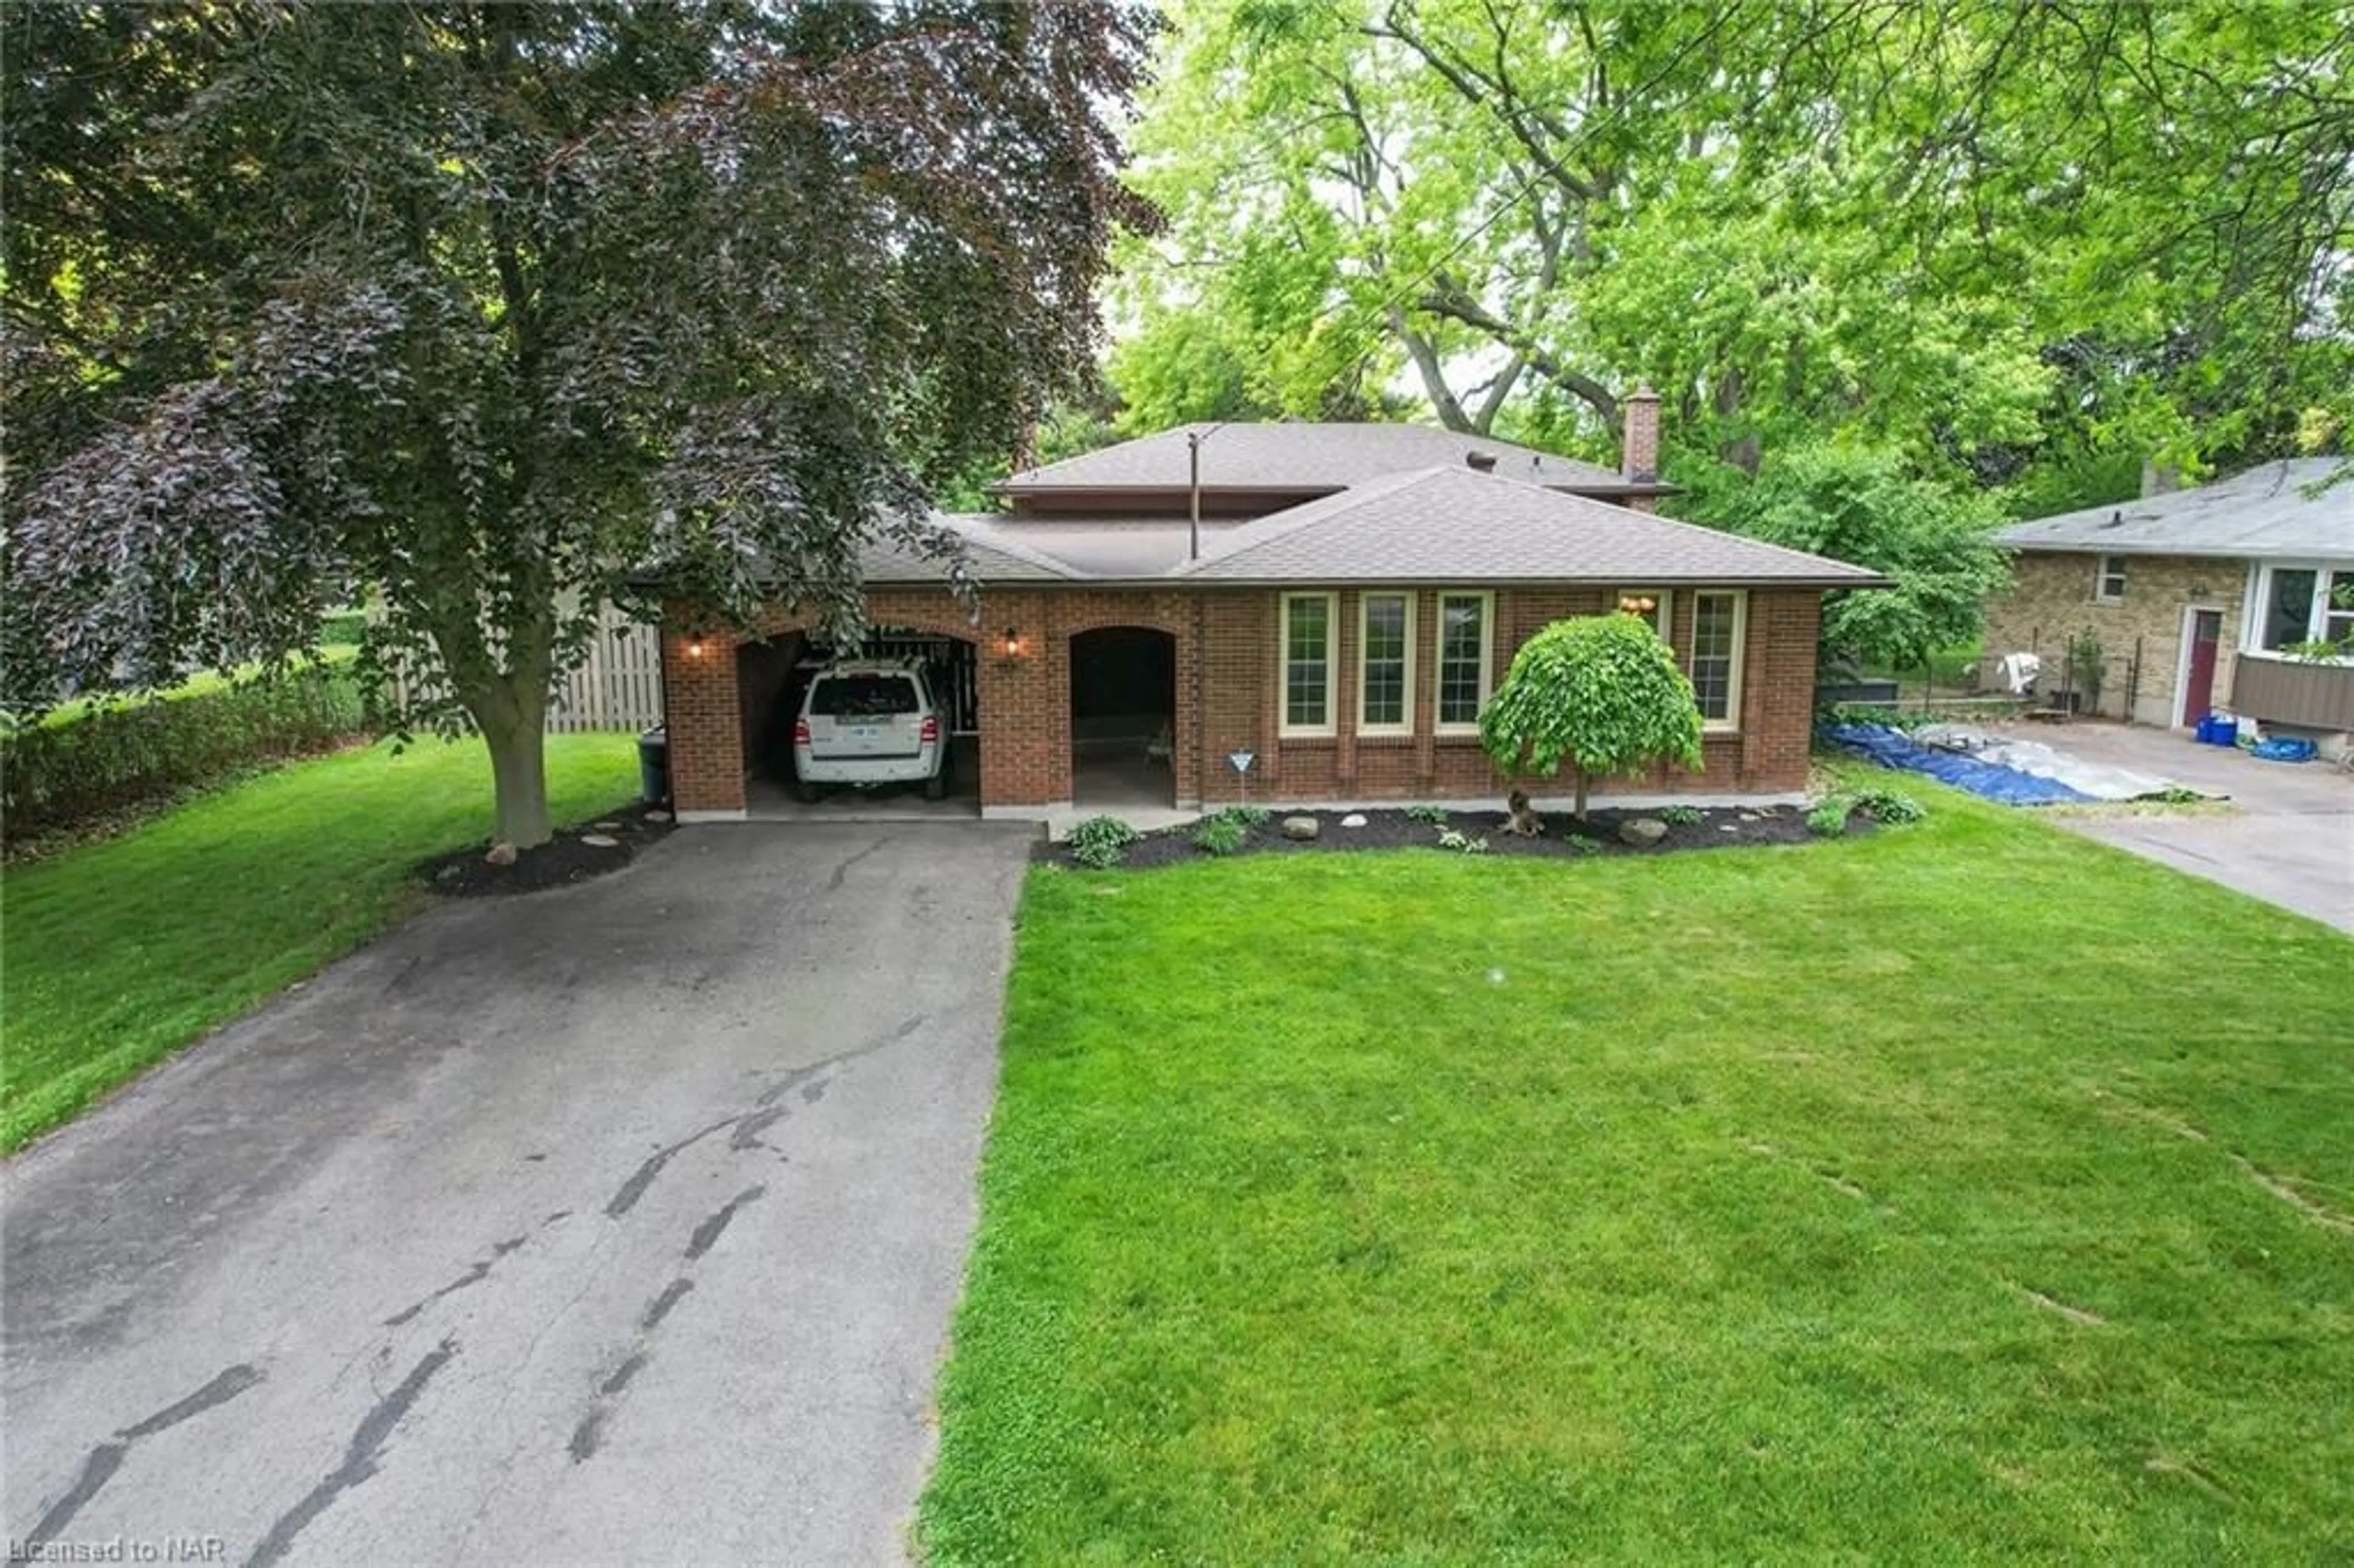 Home with brick exterior material for 55 Aquadale Dr, St. Catharines Ontario L2N 3R9